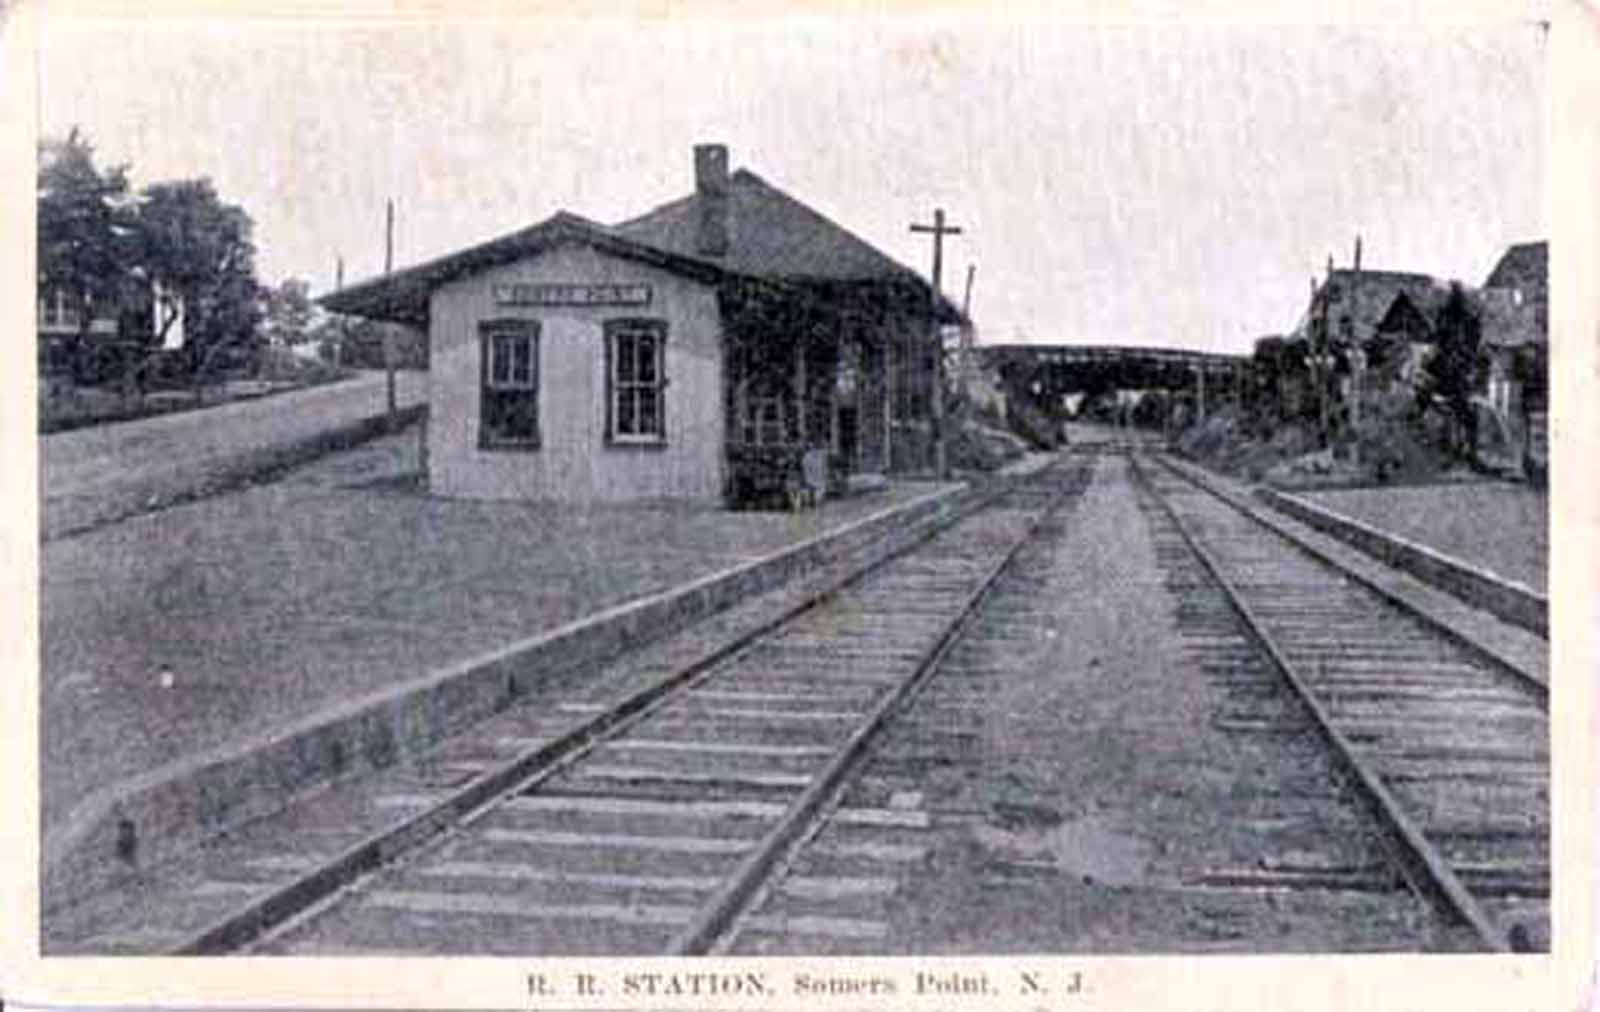 Somers Point - Railroad Station - 1920